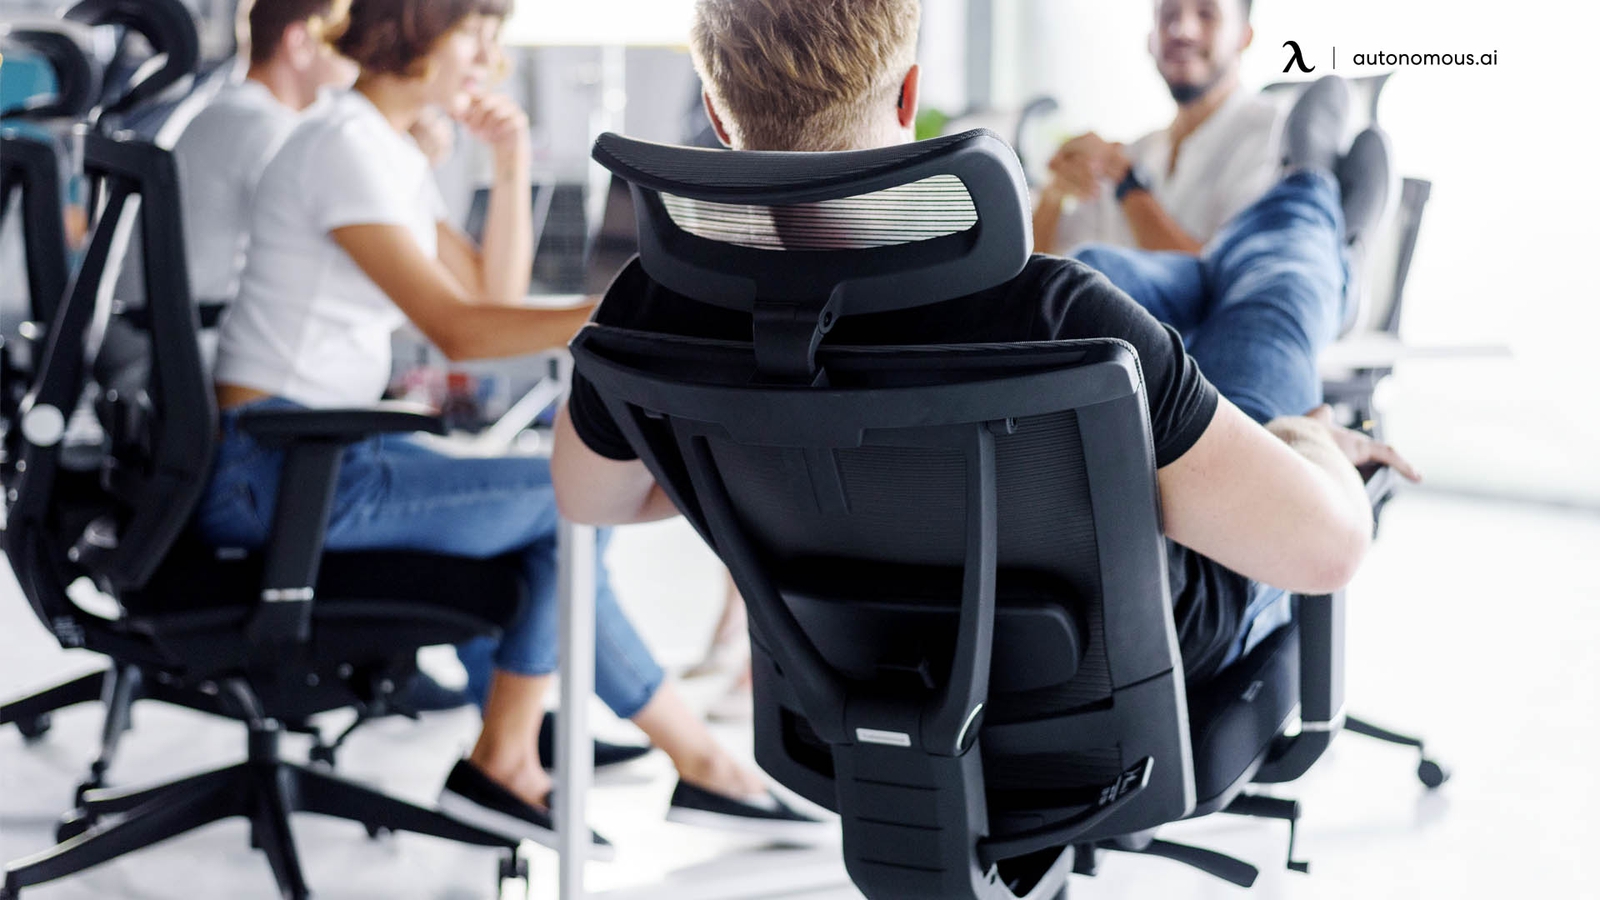 What Makes a Chair Ergonomic? How Does It Work?